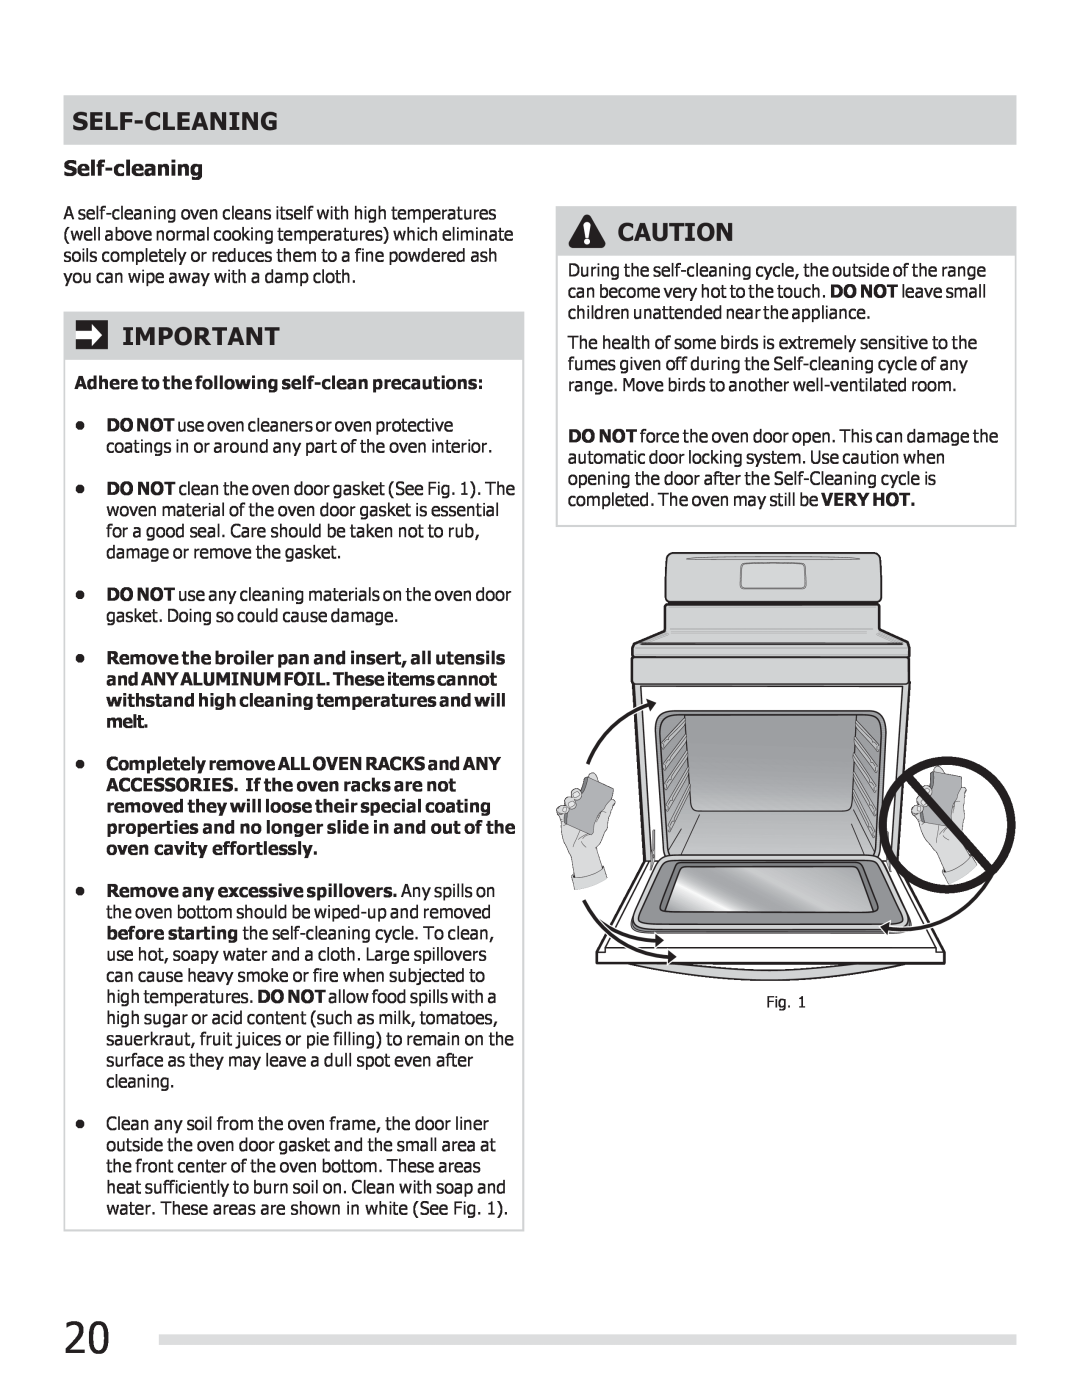 Frigidaire 316901309 important safety instructions Self-Cleaning, Self-cleaning 